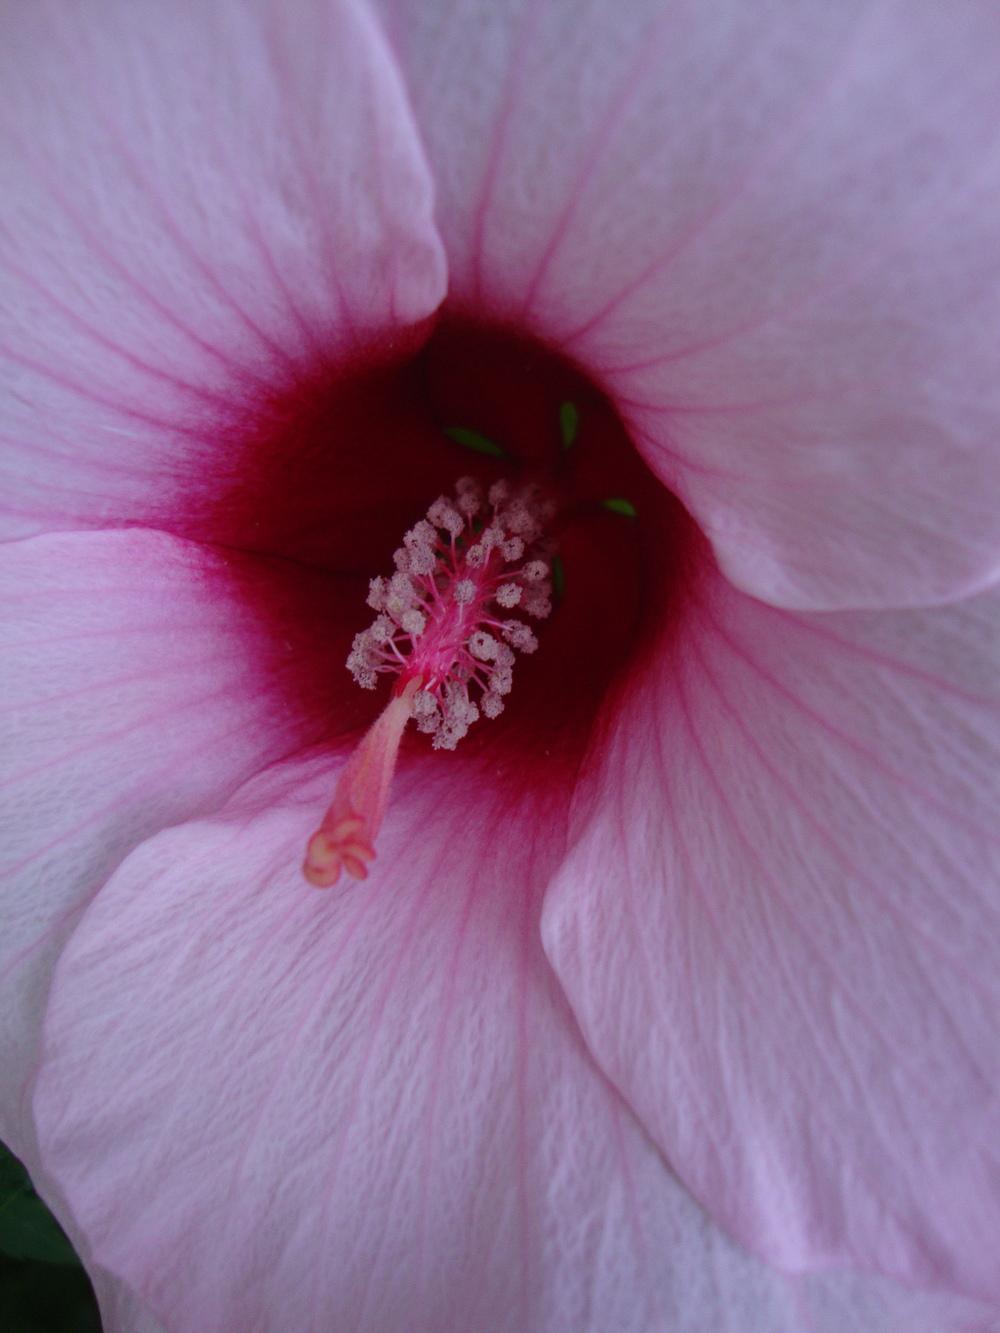 Photo of Hibiscus uploaded by Paul2032